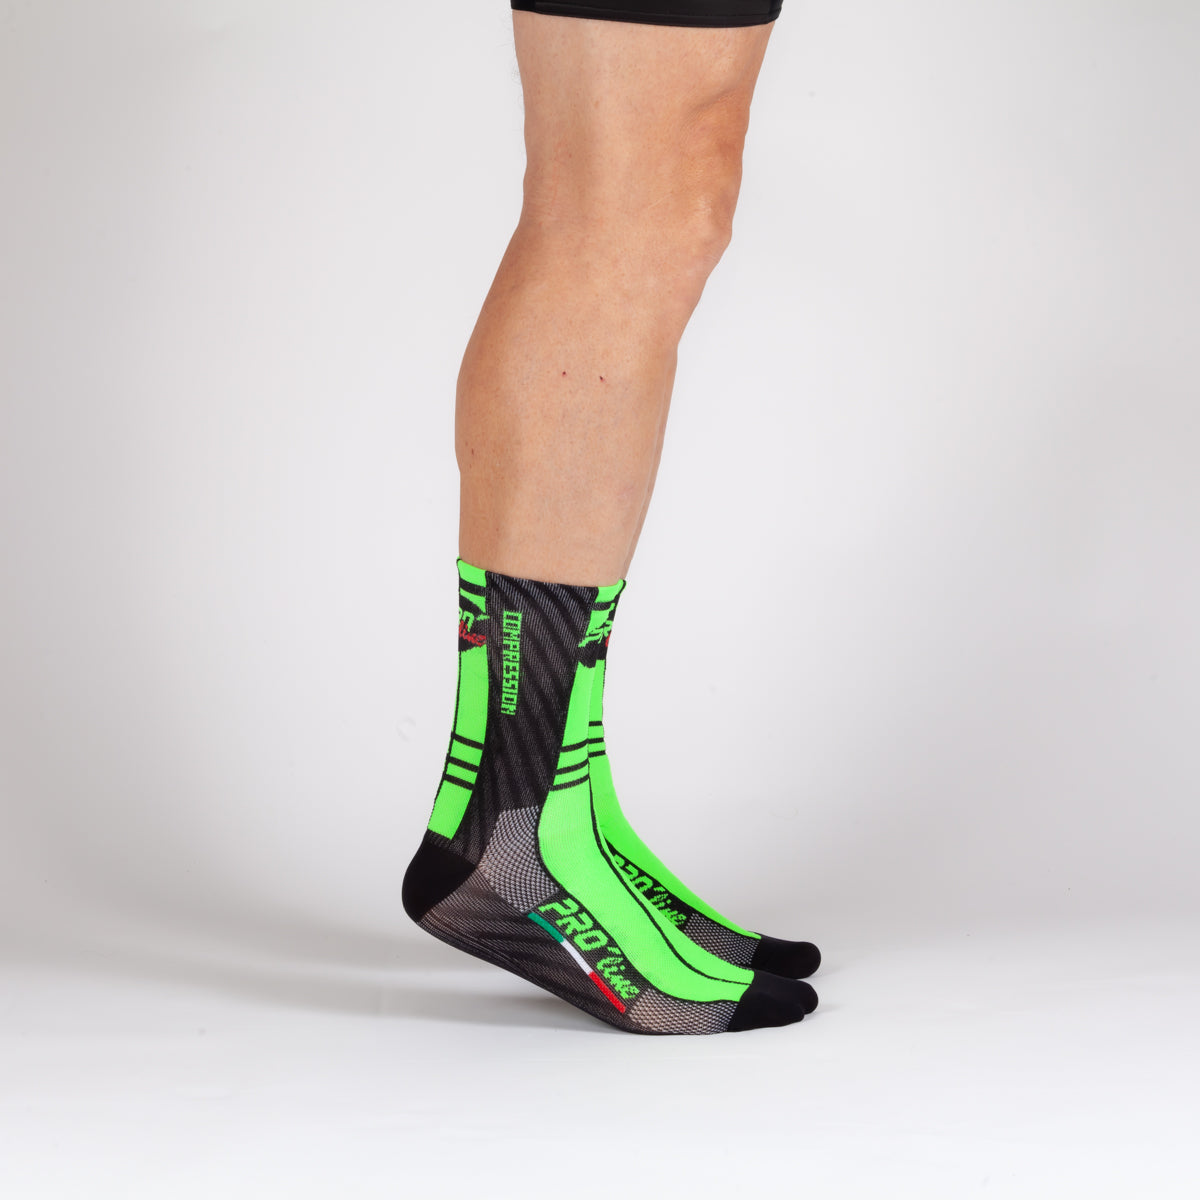 Kit 3 Pairs Compression Socks Green Fluo